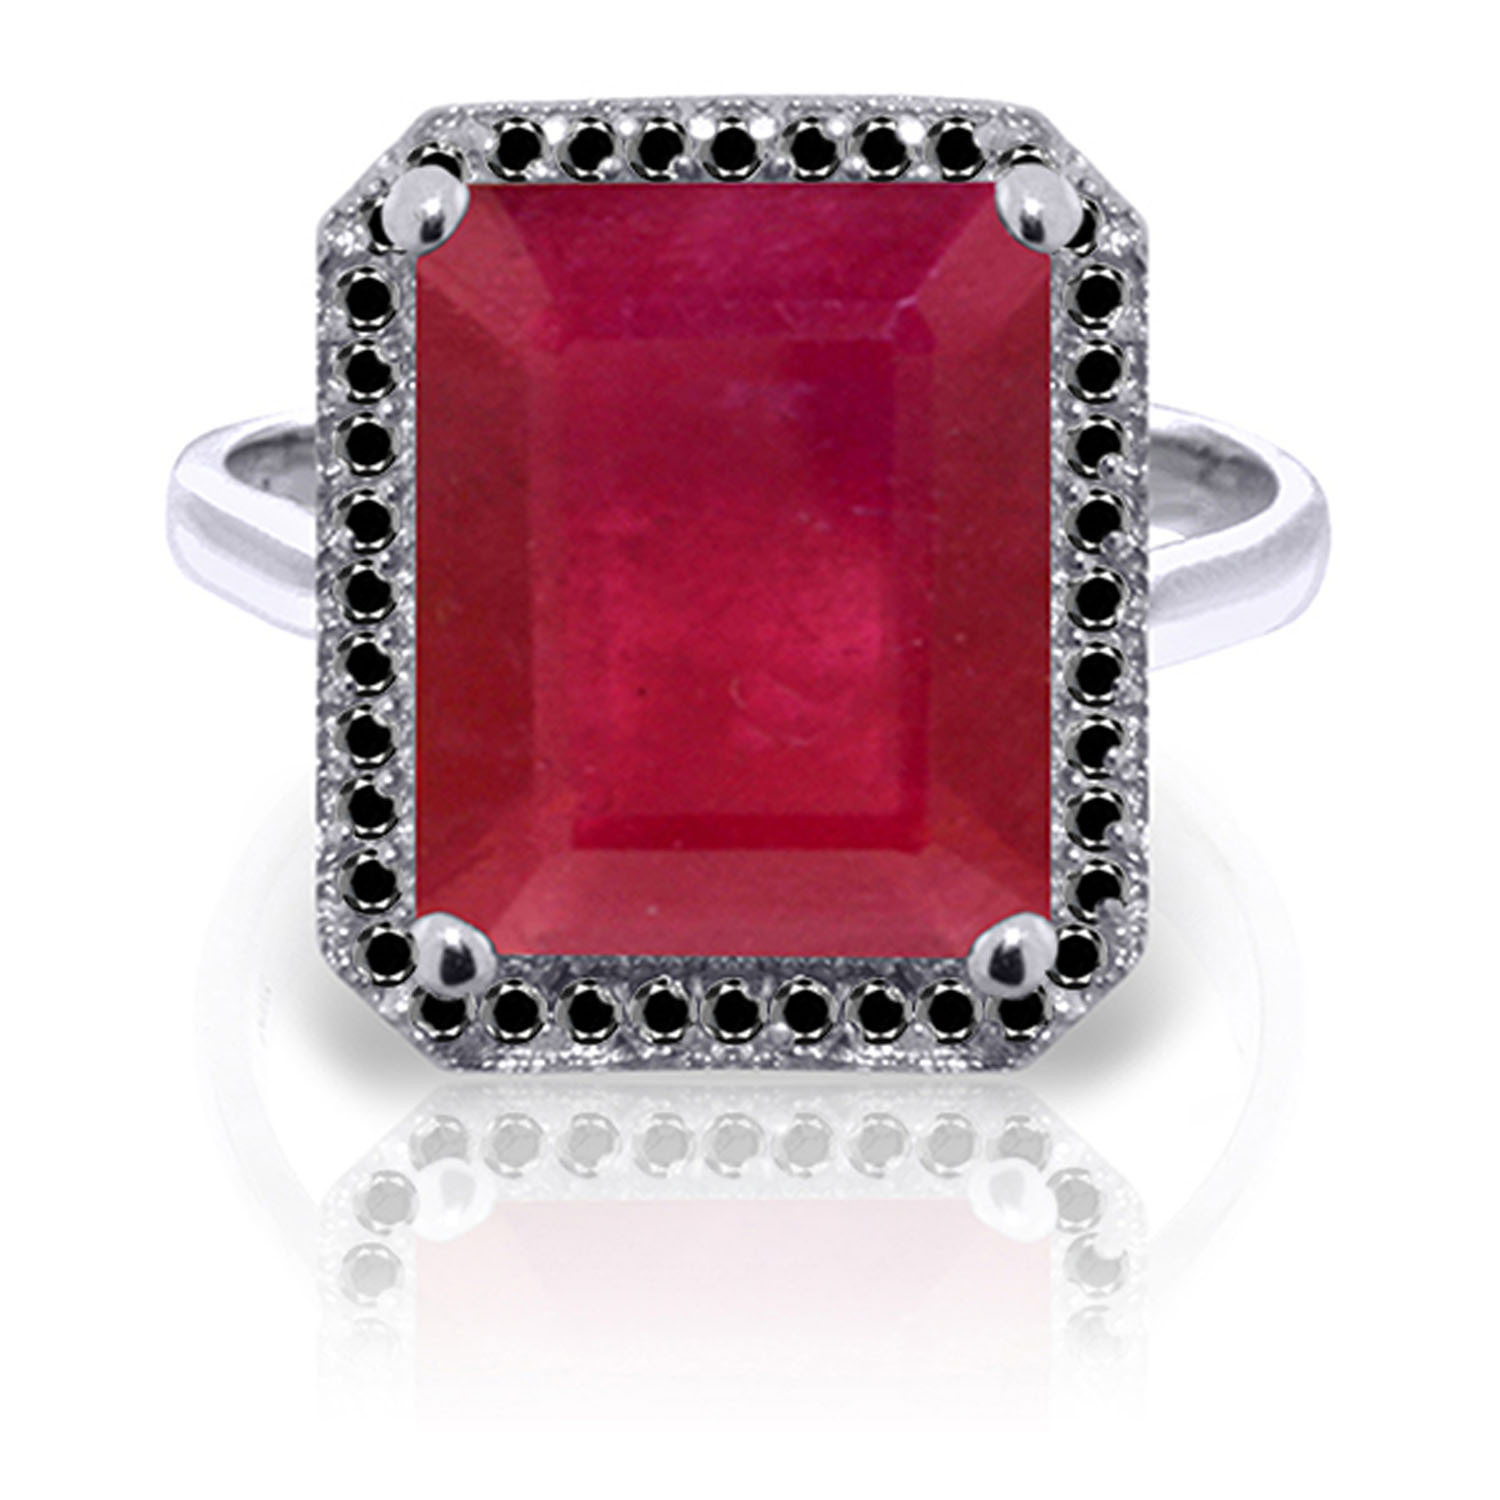 Platinum Plated 925 Sterling Silver Ring w/ Natural Black Diamonds & Ruby - $287.61